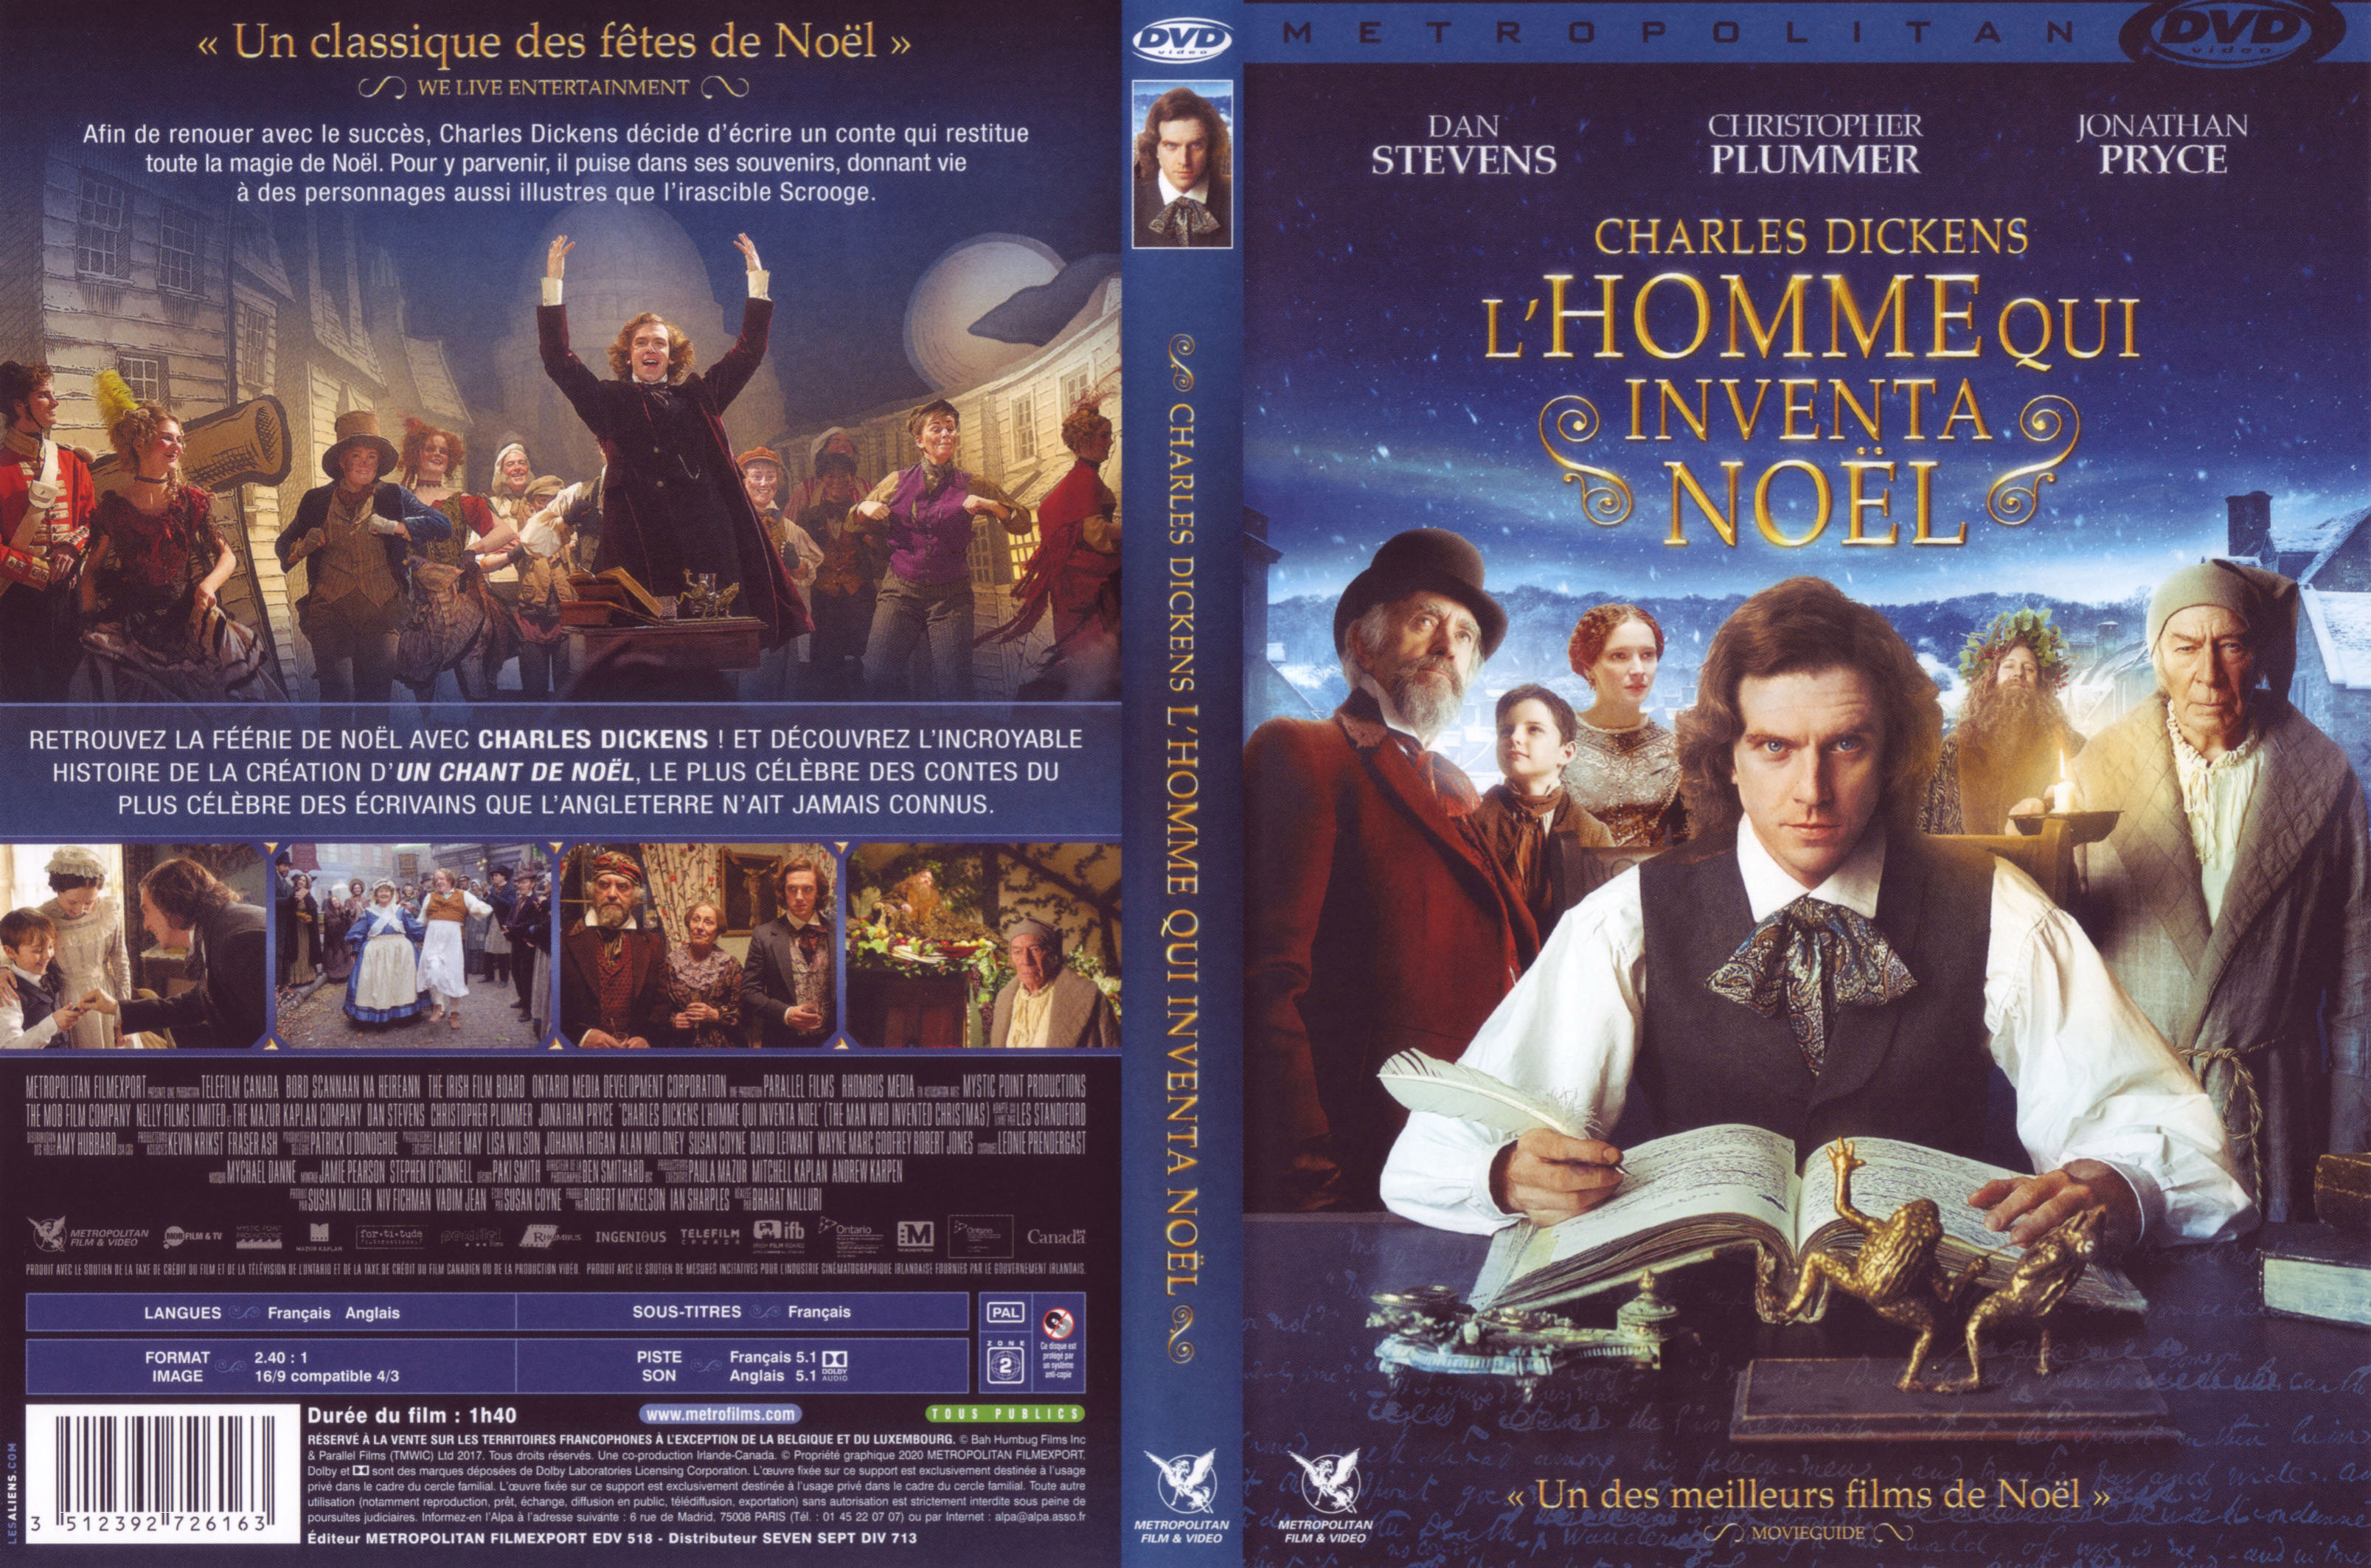 Jaquette DVD Charles Dickens, l